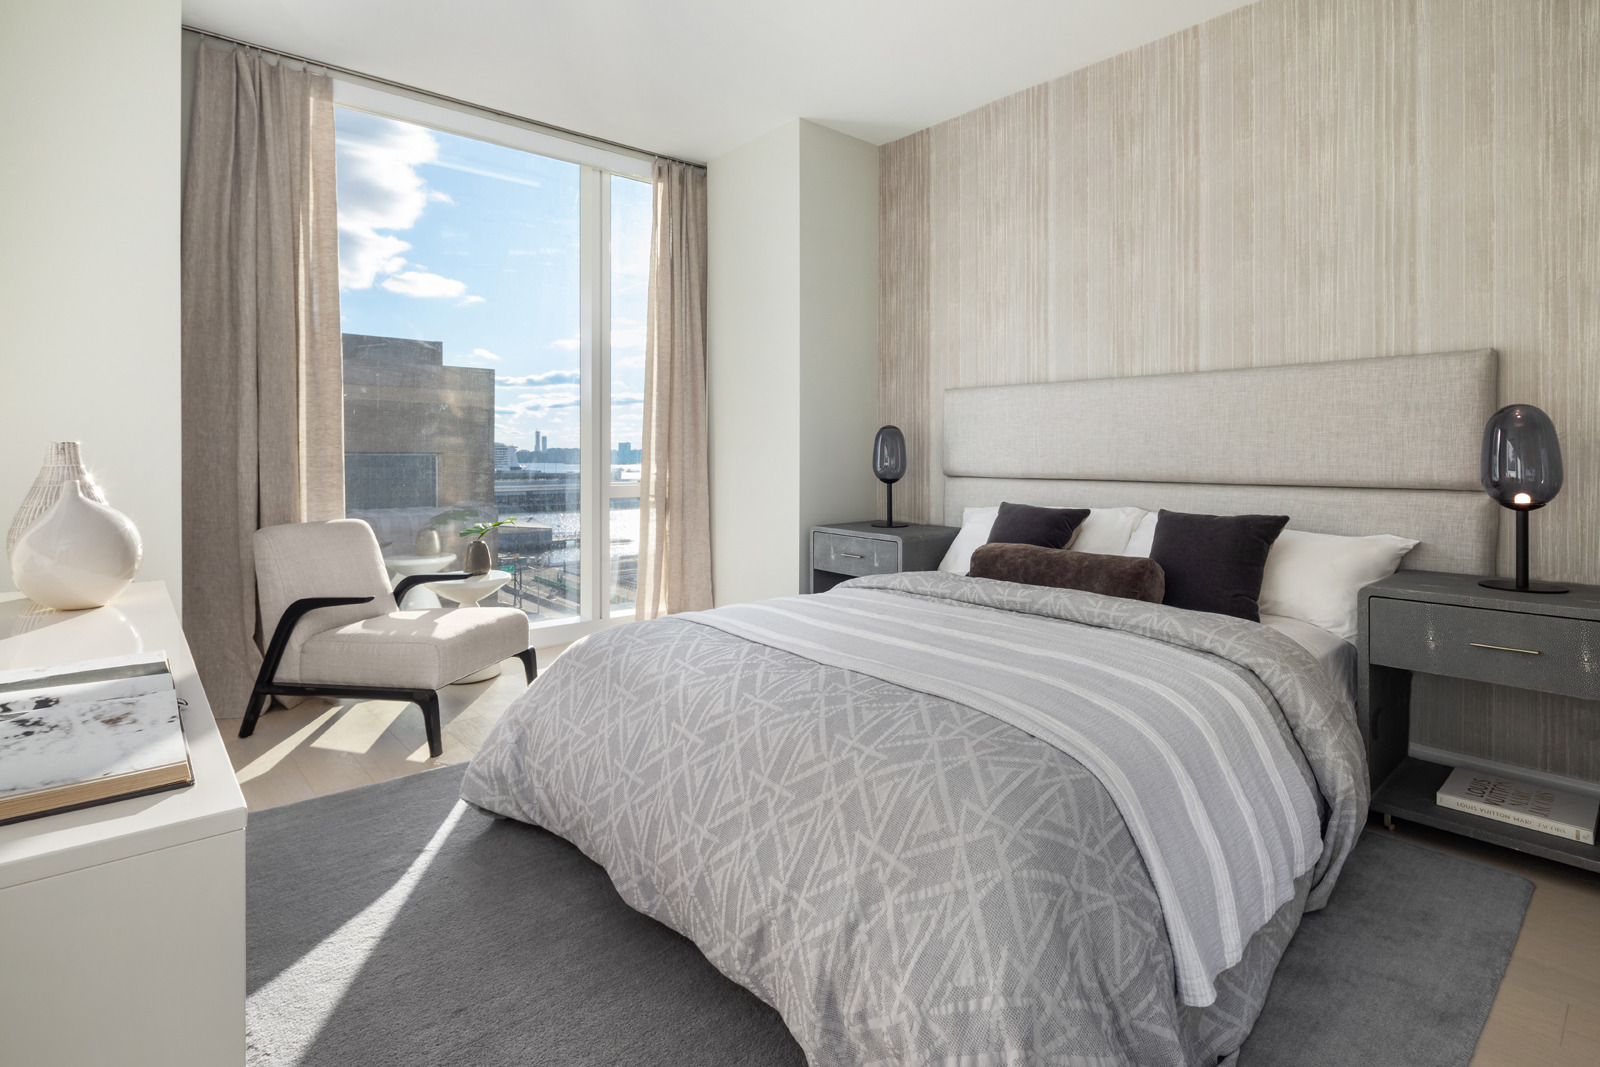 A modern, well-lit bedroom with a large window offering a city view, featuring a neatly made bed with gray and white bedding, flanked by contemporary bedside tables and lamps, with a cozy sitting area in the corner.